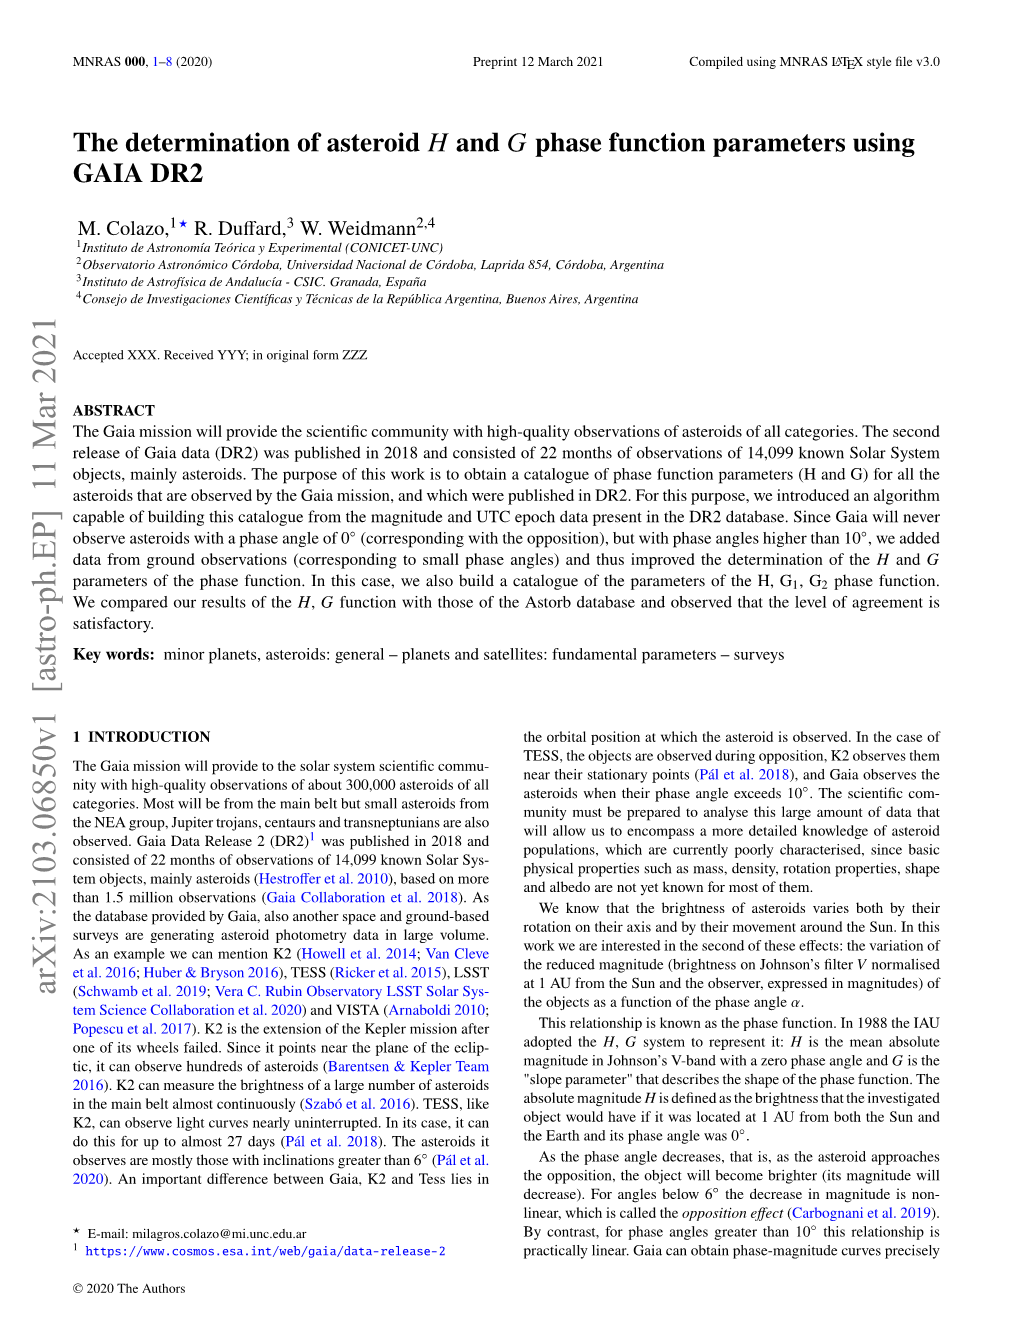 The Determination of Asteroid H and G Phase Function Parameters Using